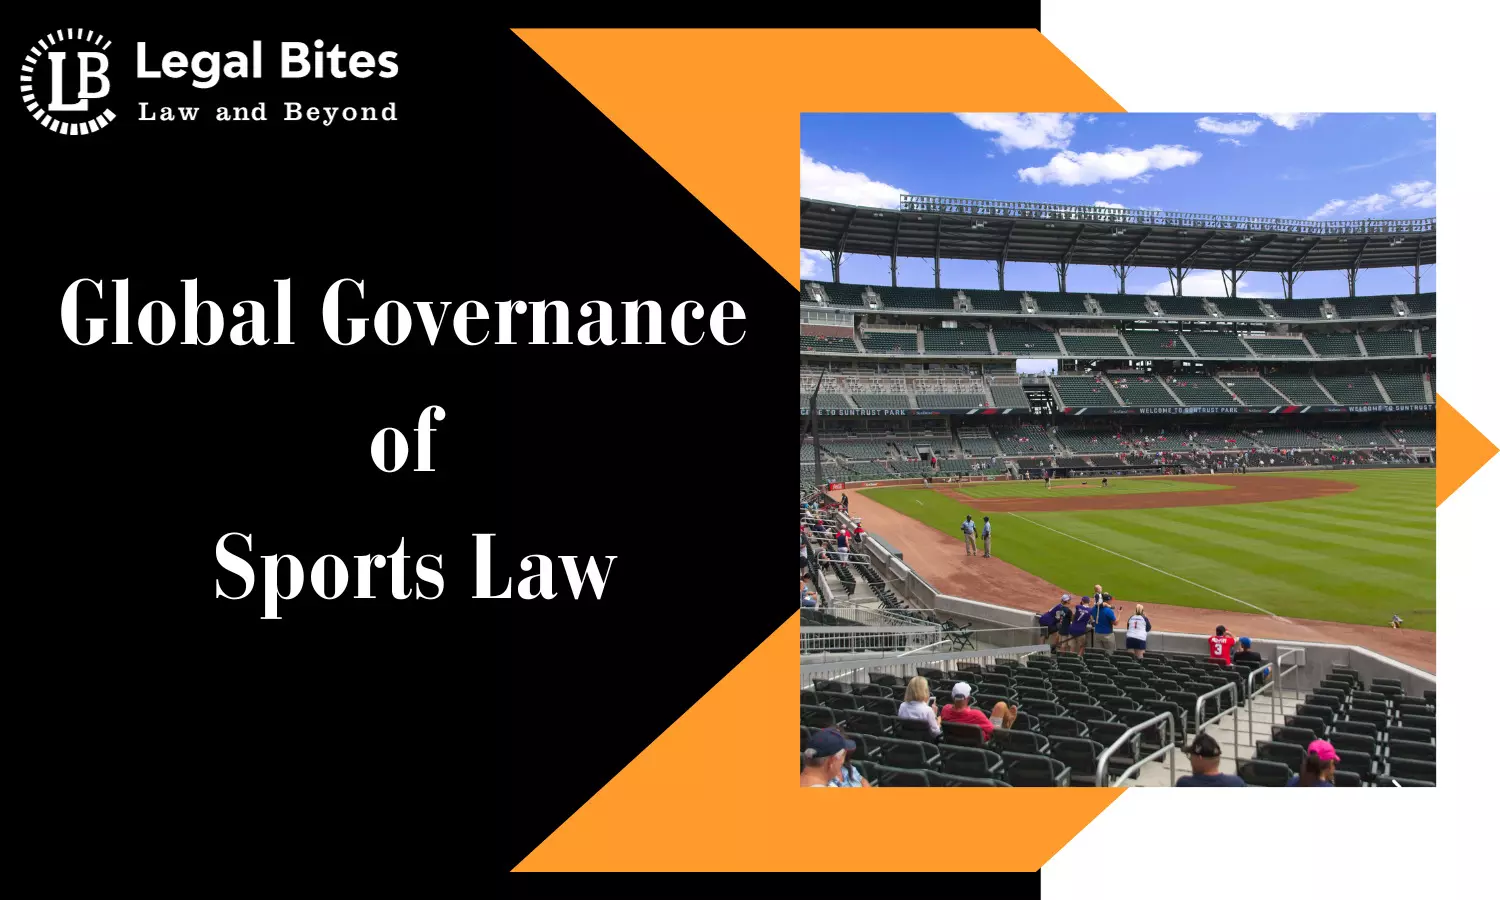 Global Governance of Sports Law